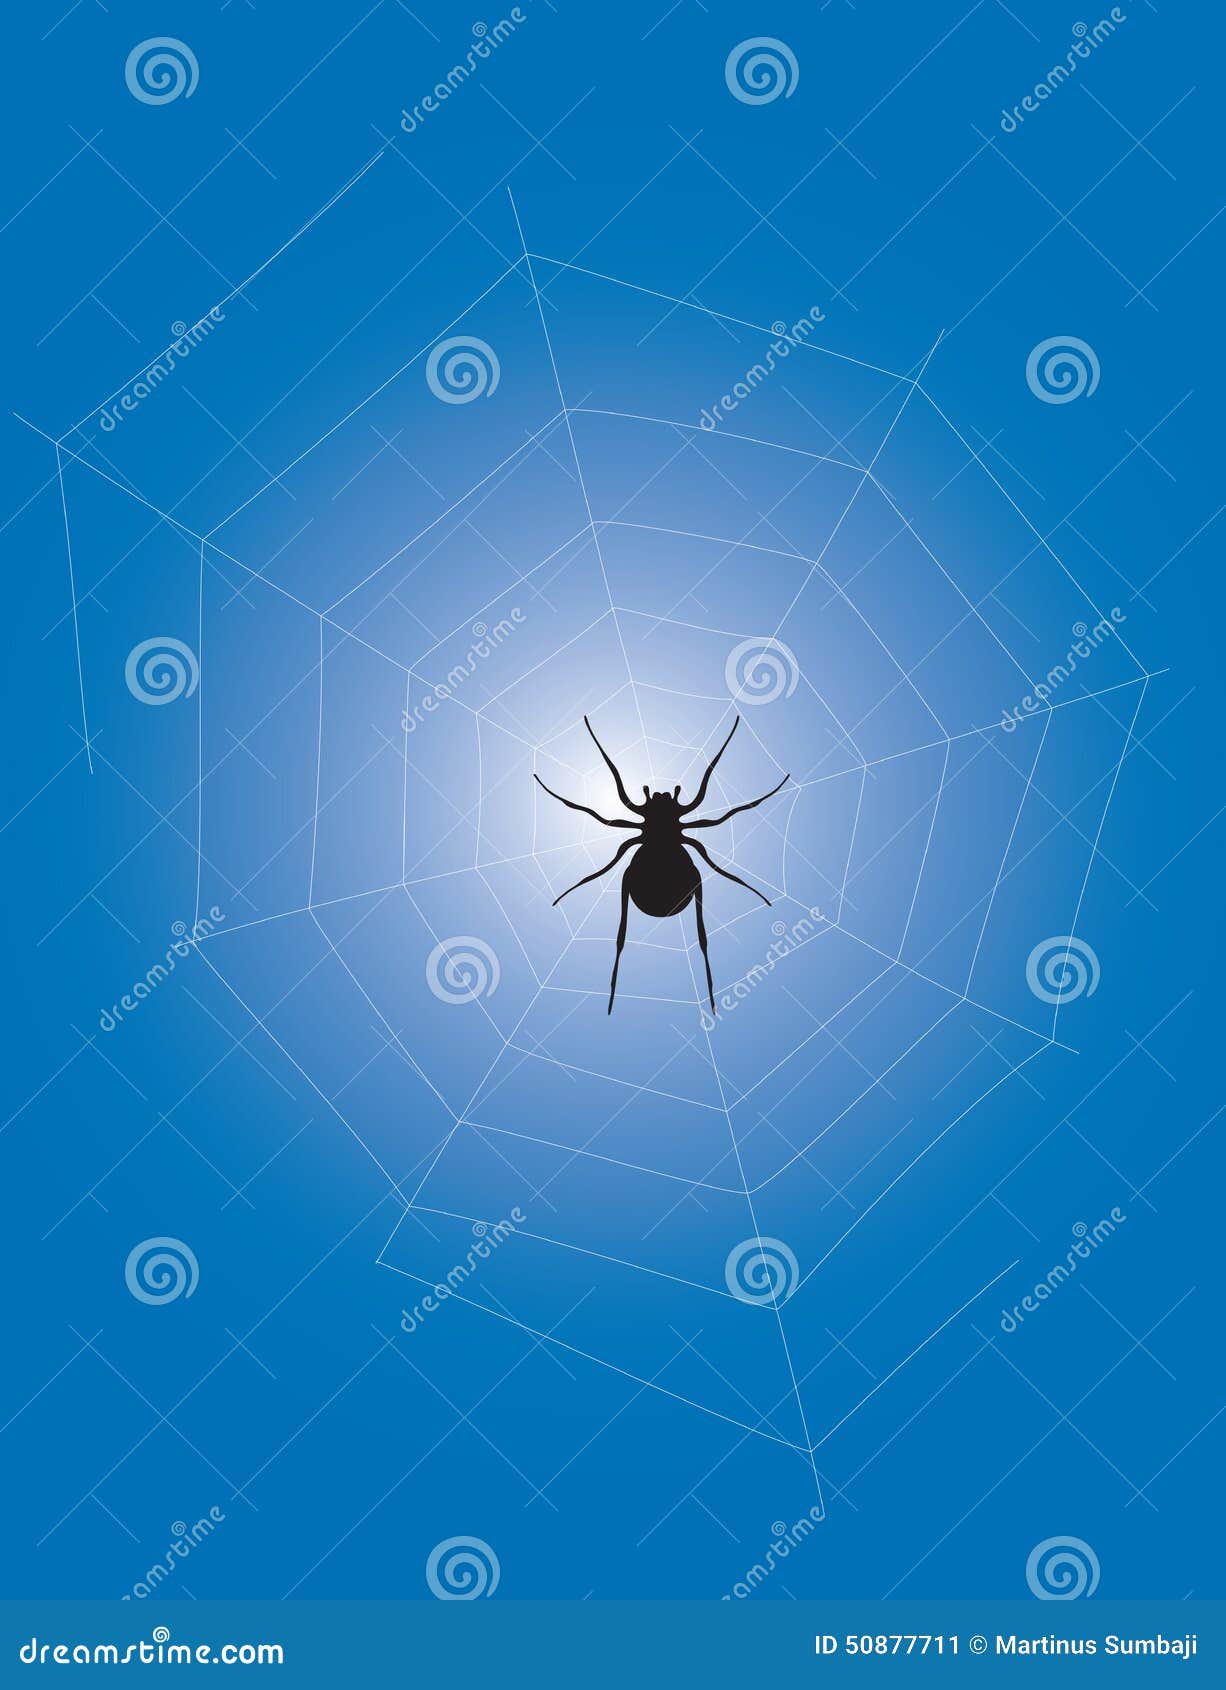 Spider icon stock vector. Illustration of isolated, retro - 50877711